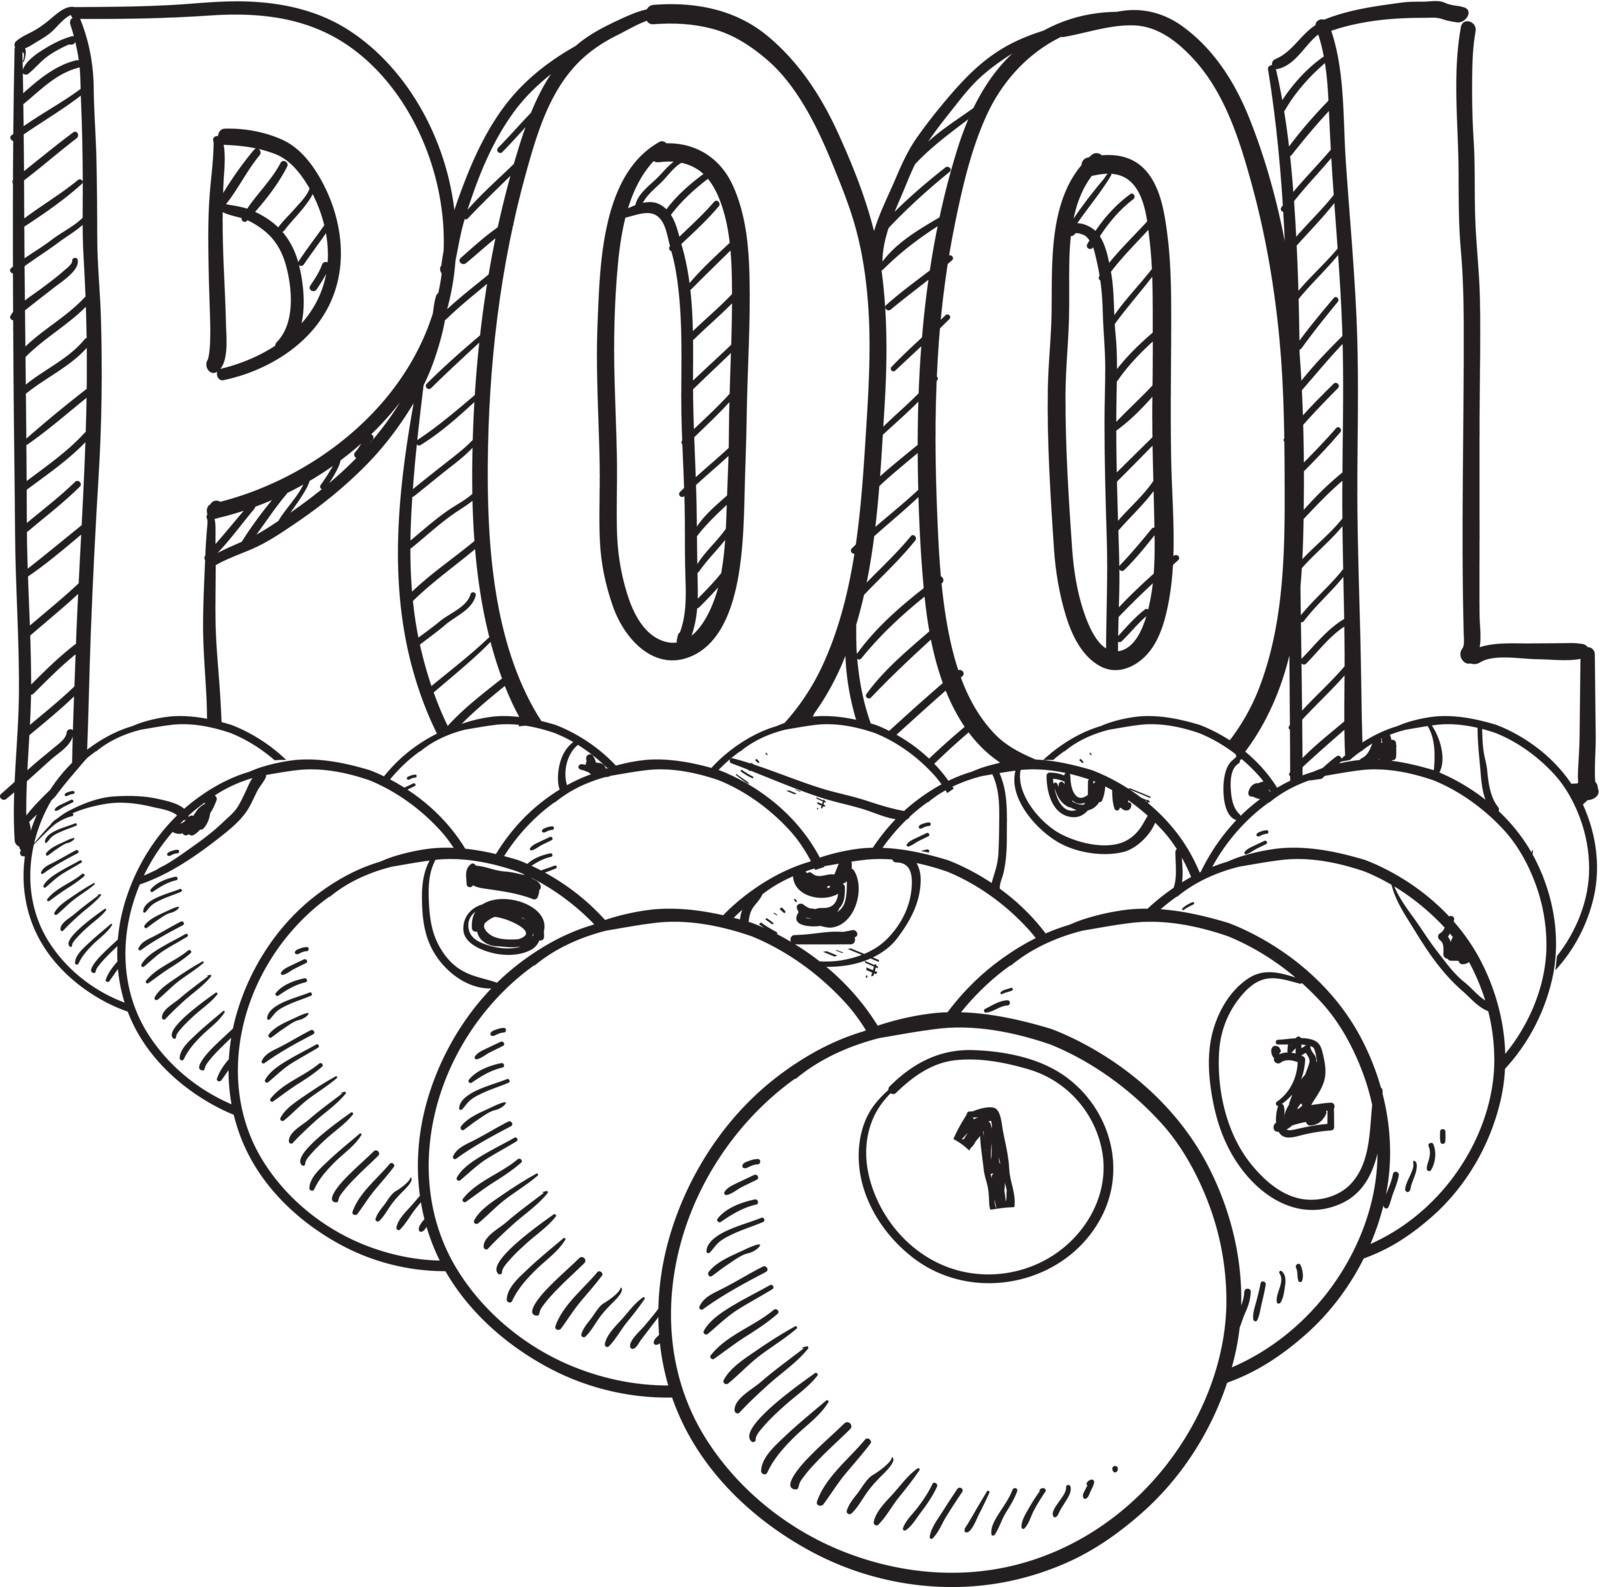 Doodle style pool or billiards illustration in vector format. Includes text and pool balls.